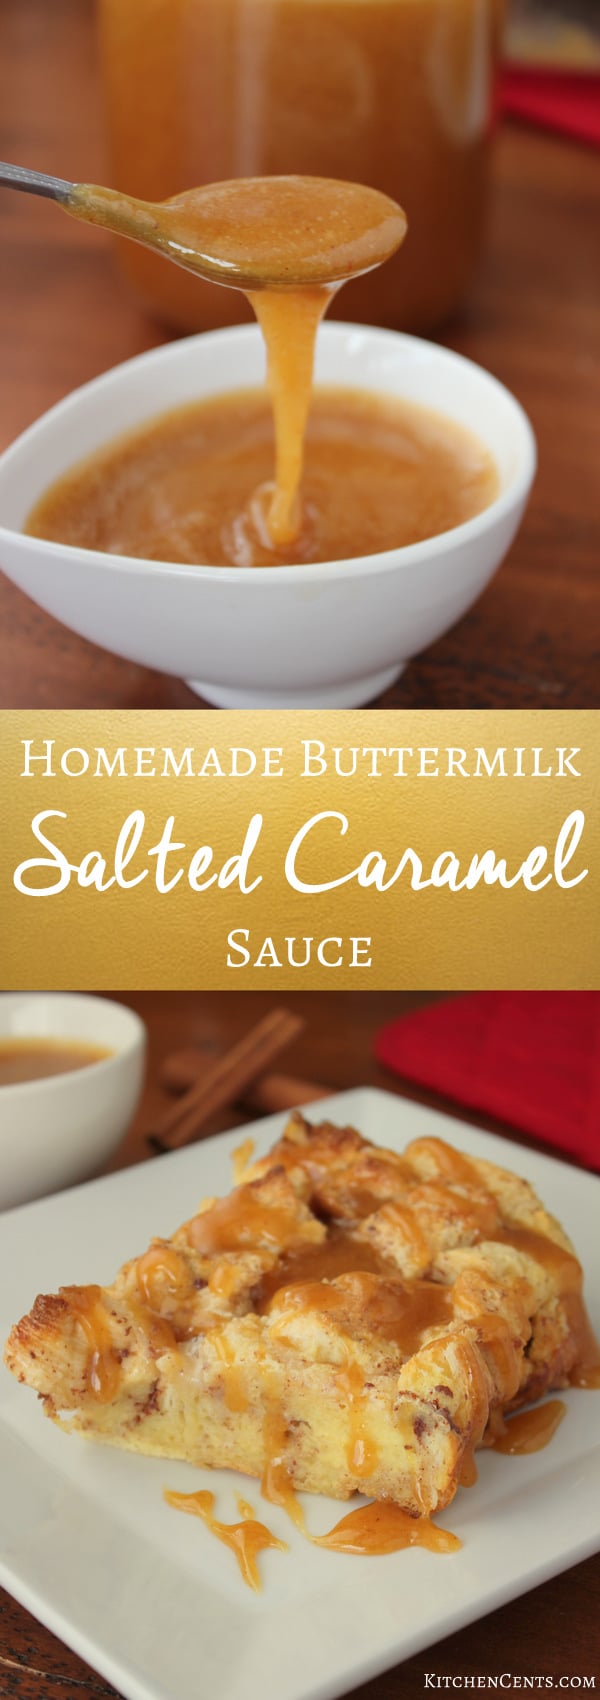 easy-buttermilk-salted-caramel-sauce | KitchenCents.com